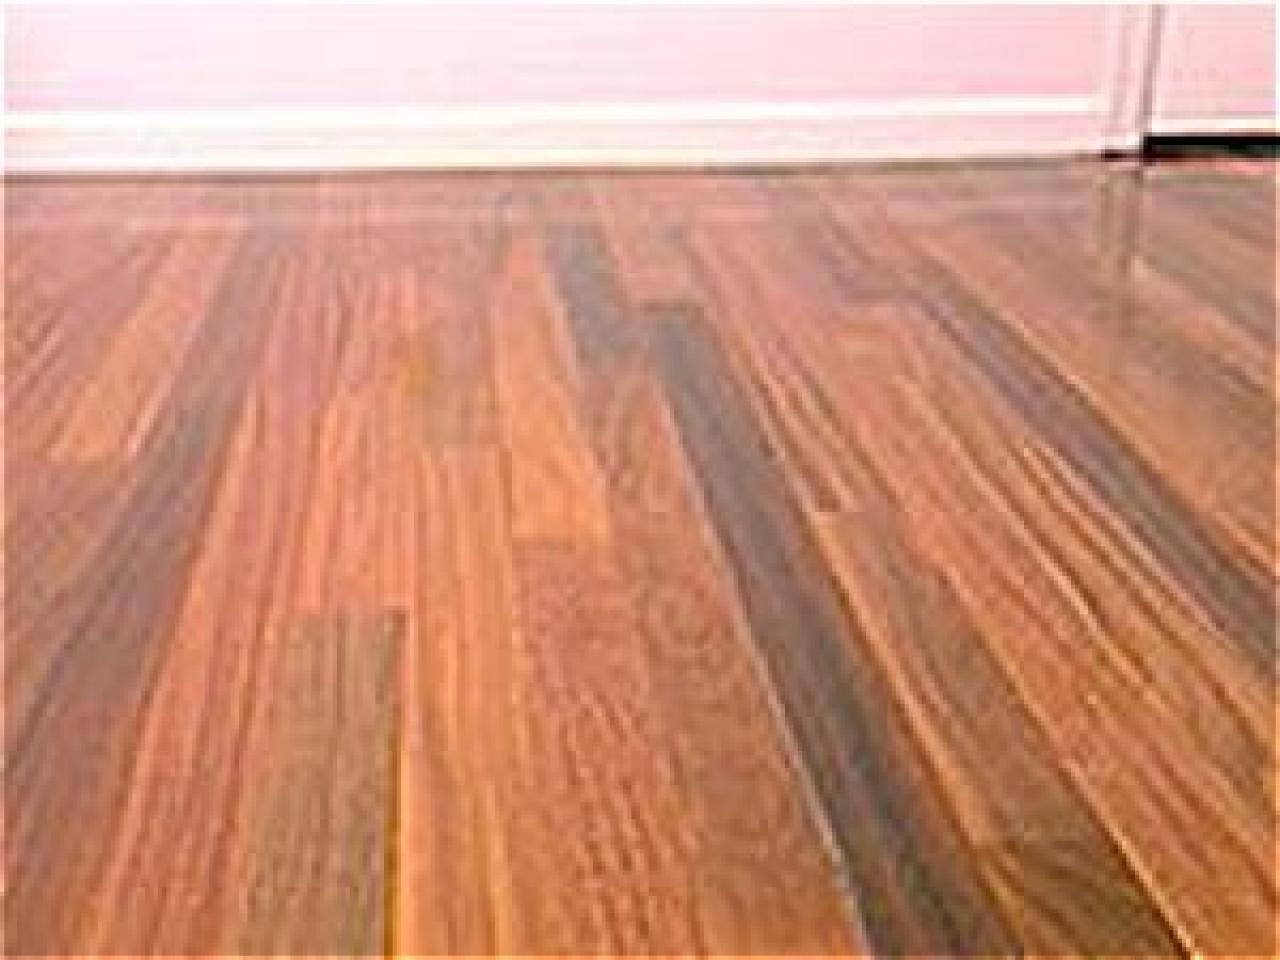 How To Install A Hardwood Floor, What Size Staples For Hardwood Flooring